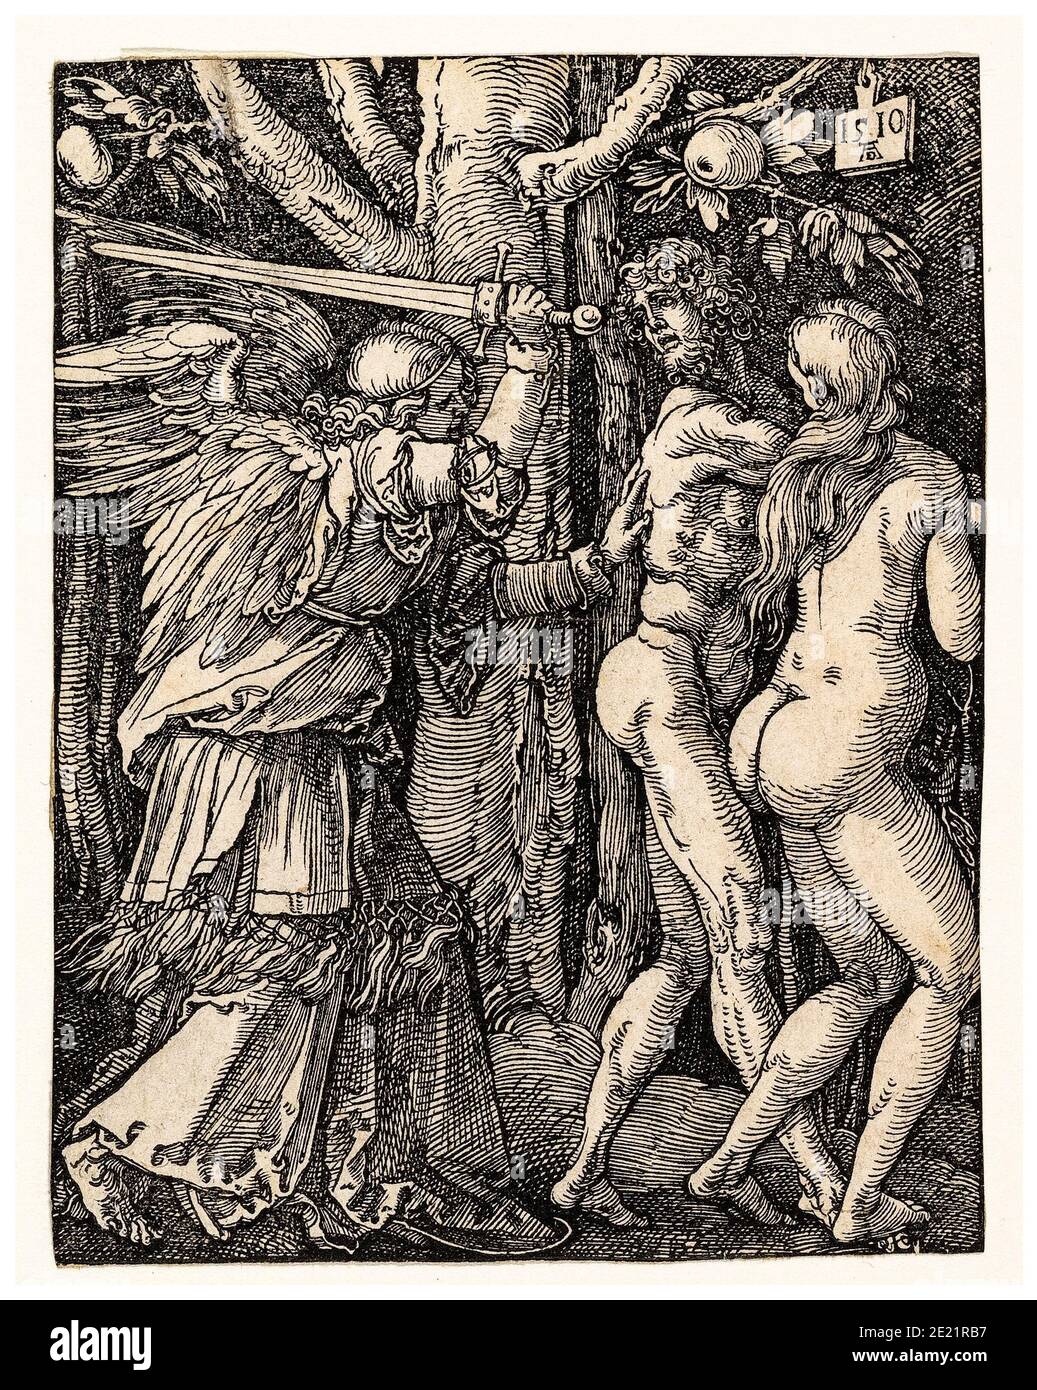 The Small Passion: The Expulsion from Paradise, (Adam and Eve), engraving by Albrecht Dürer, 1510 Stock Photo